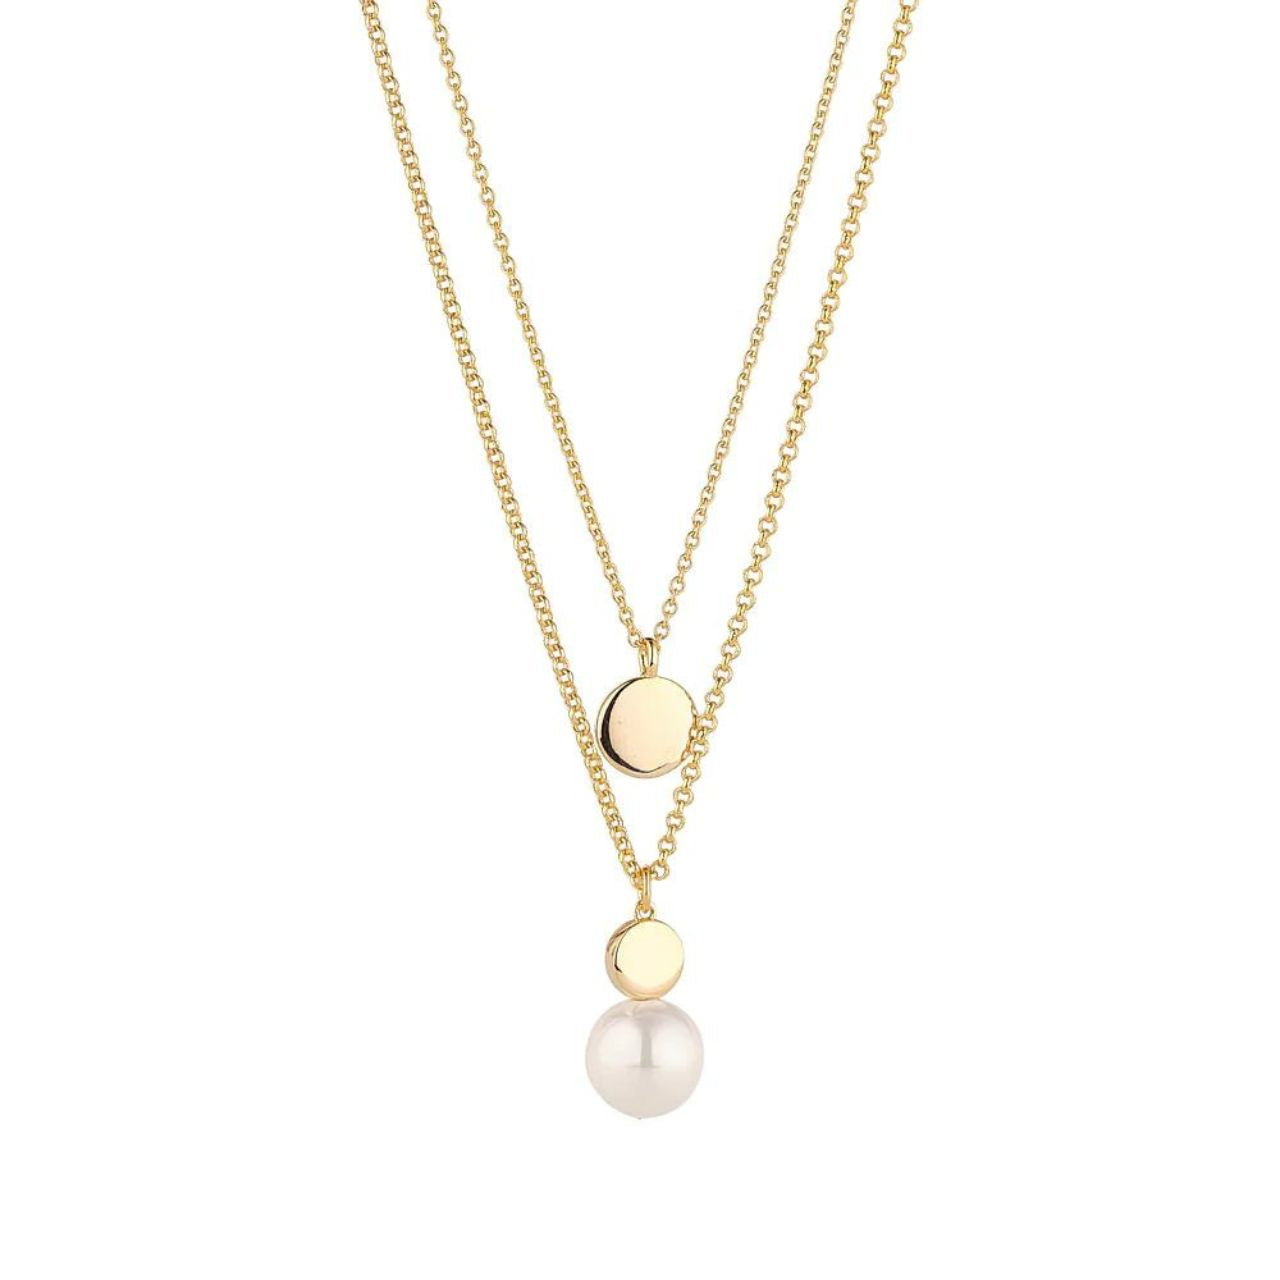 Knight & Day Gold Plated Willow Pearl Necklace  The Knight & Day Gold-Plated Willow Pearl Necklace is crafted with exquisite craftsmanship and is a timeless addition to any wardrobe.